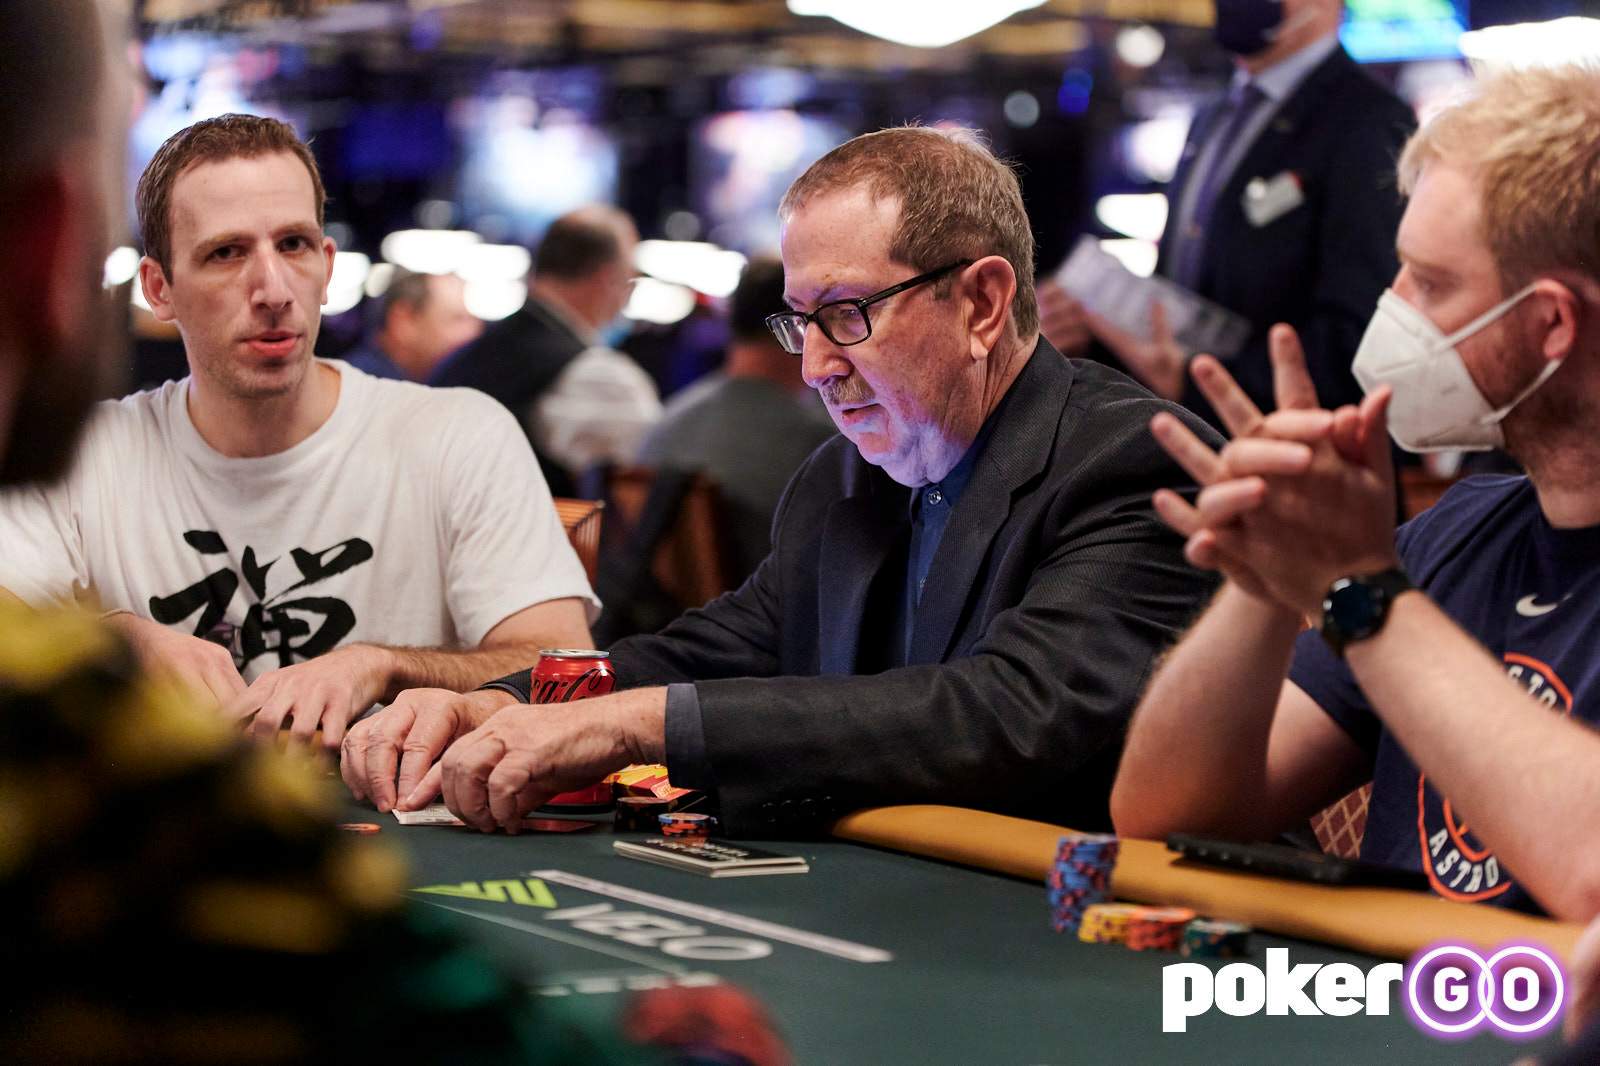 WSOP Review Day 2: Ausmus and Barnett Claim Gold, Glaser Leads $25k H.O.R.S.E. Final Table